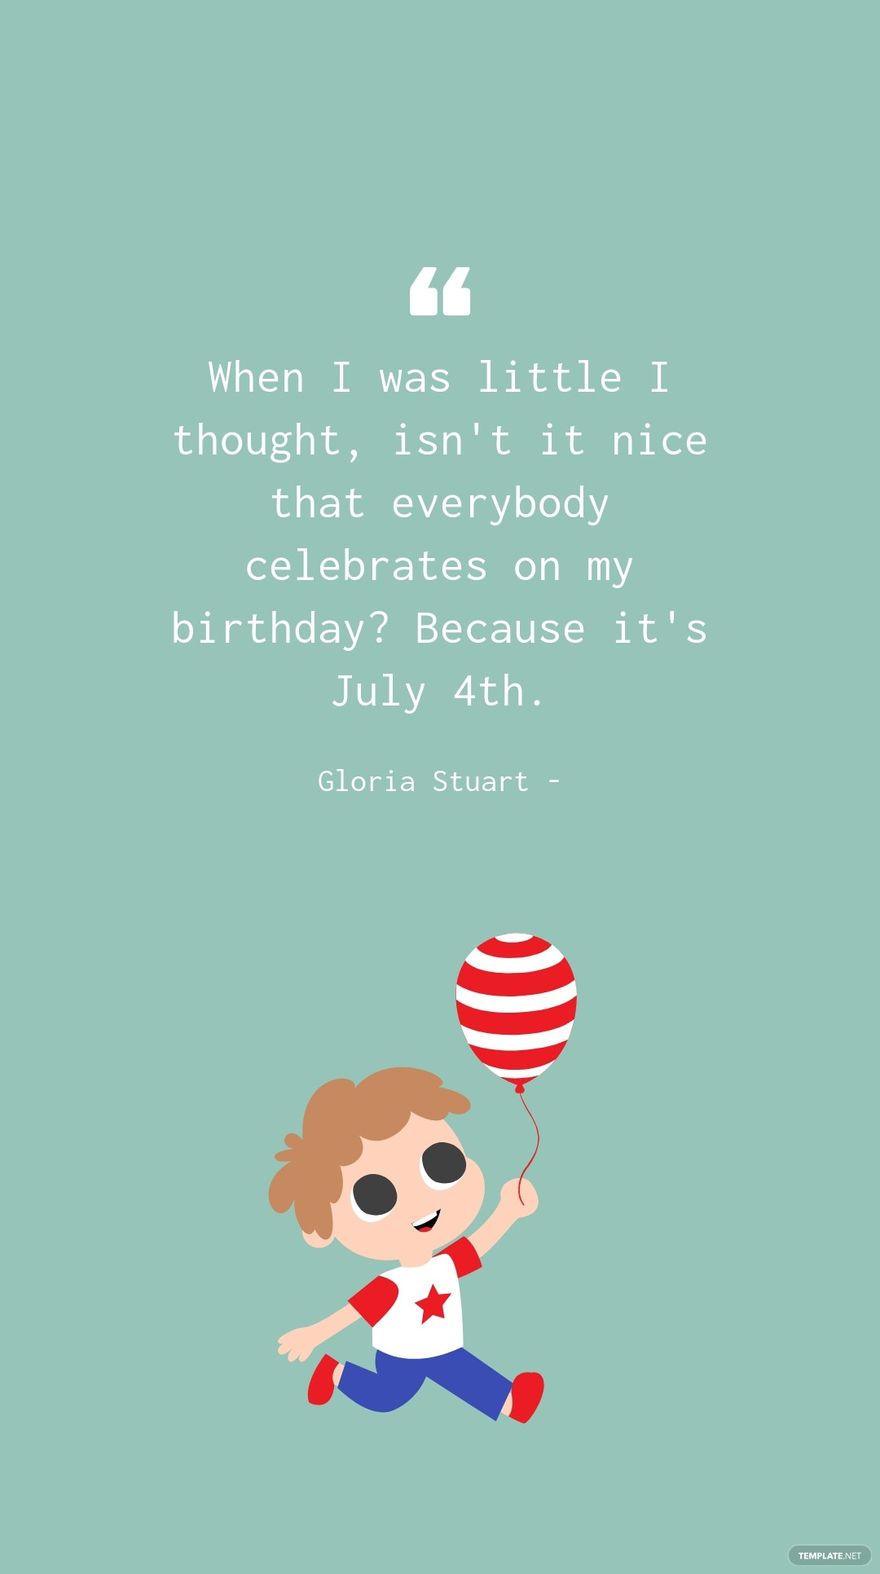 Gloria Stuart - When I was little I thought, isn't it nice that everybody celebrates on my birthday? Because it's July 4th. in JPG